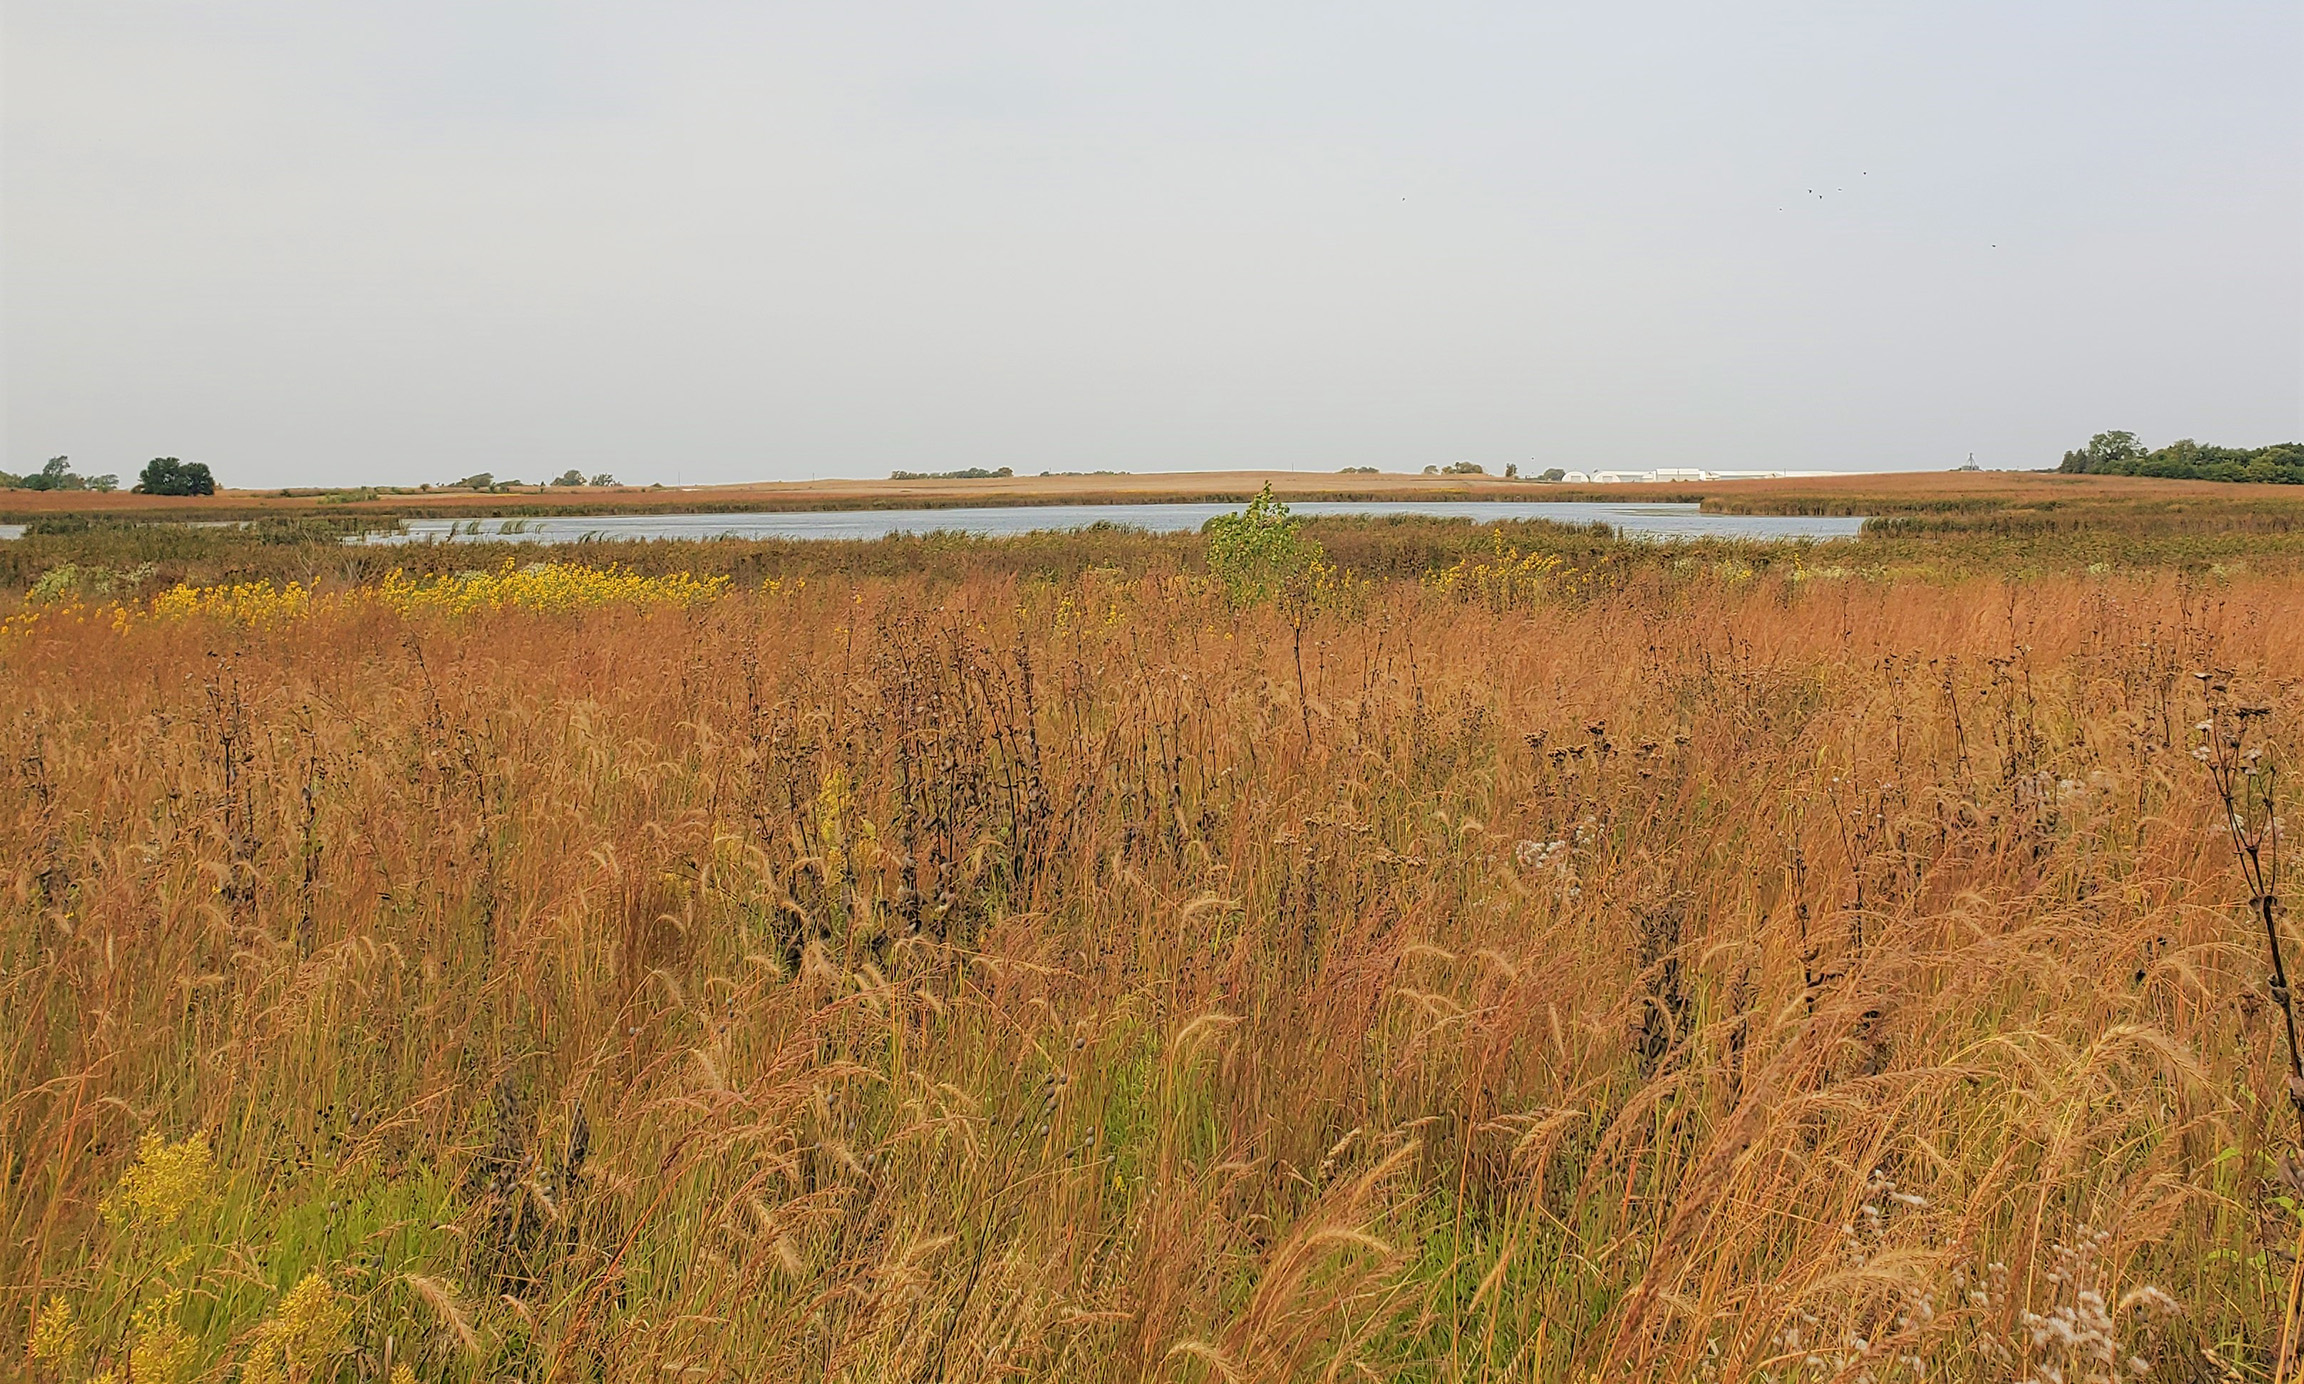 A water-filled prairie pothole wetland in the flat landscape of Iowa. In the foreground is the long grass and flowers of a restored prairie habitat.